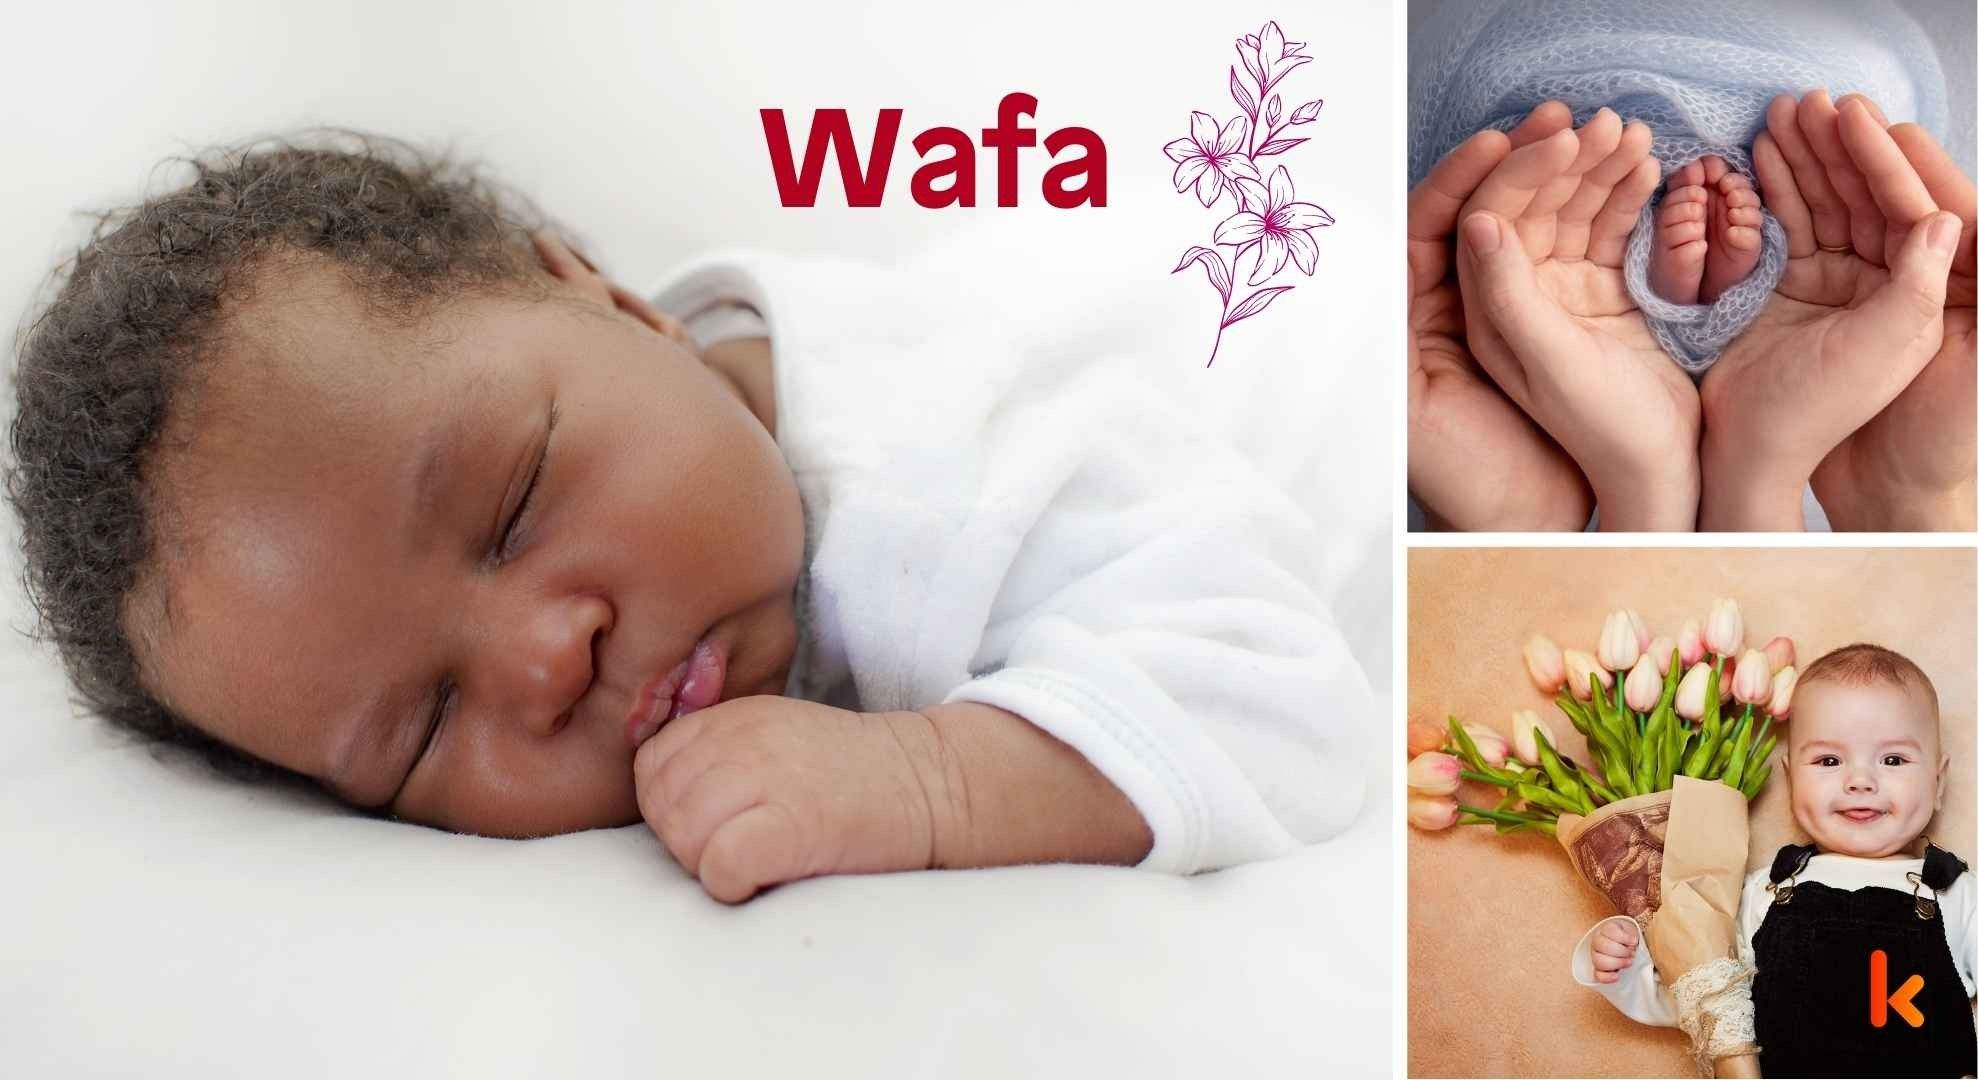 Meaning of the name Wafa